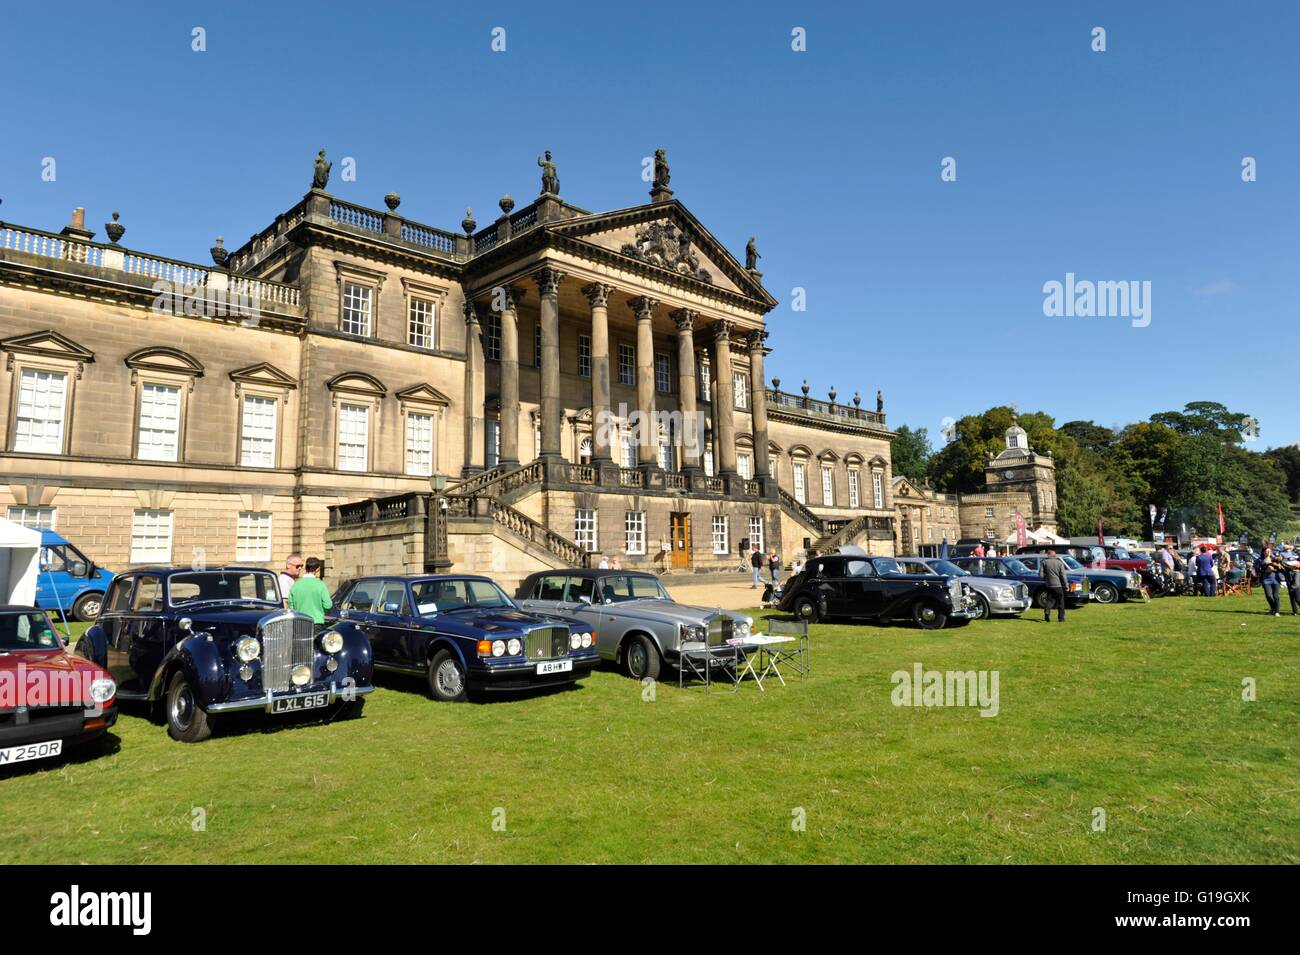 A collection of Rolls Royce motor cars at a car rally at Wentworth Woodhouse Stock Photo